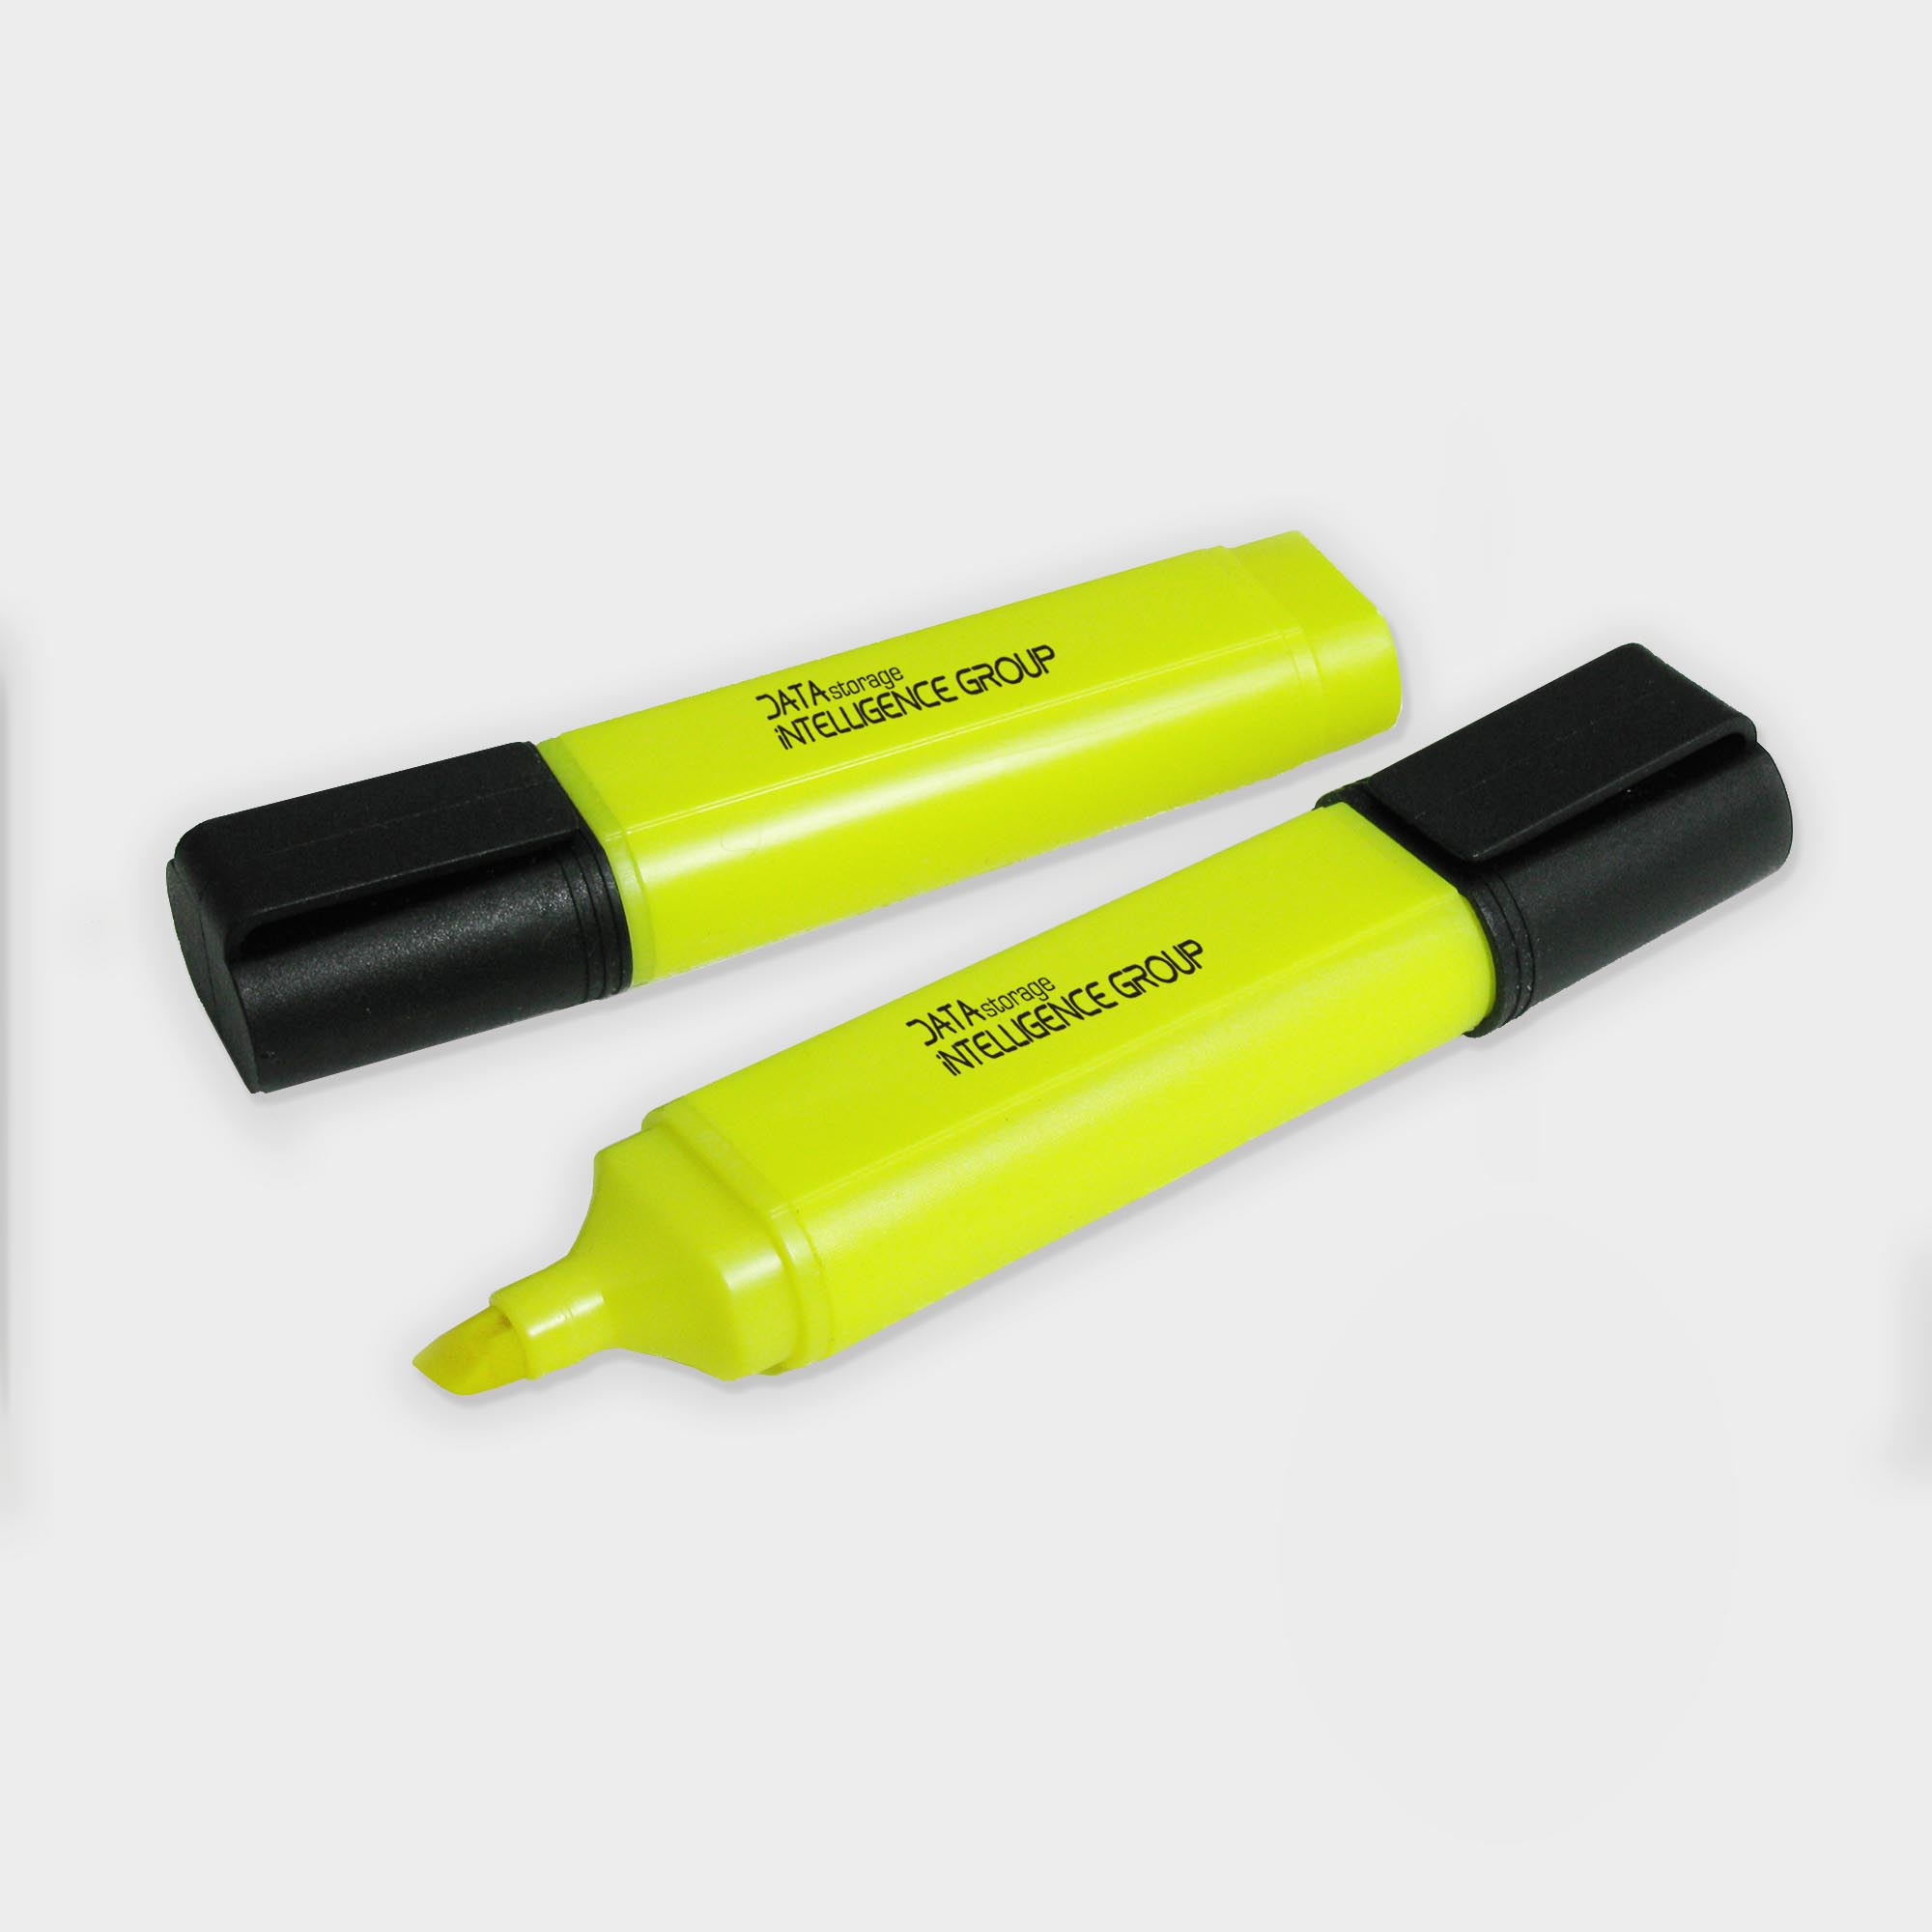 The Green & Good Highlighter Pen made from recycled plastic. A practical highlighter made in the EU. It is ideal for home, school or office use and is available with a white or yellow barrel and a black lid. Yellow insert as standard. Yellow / Black